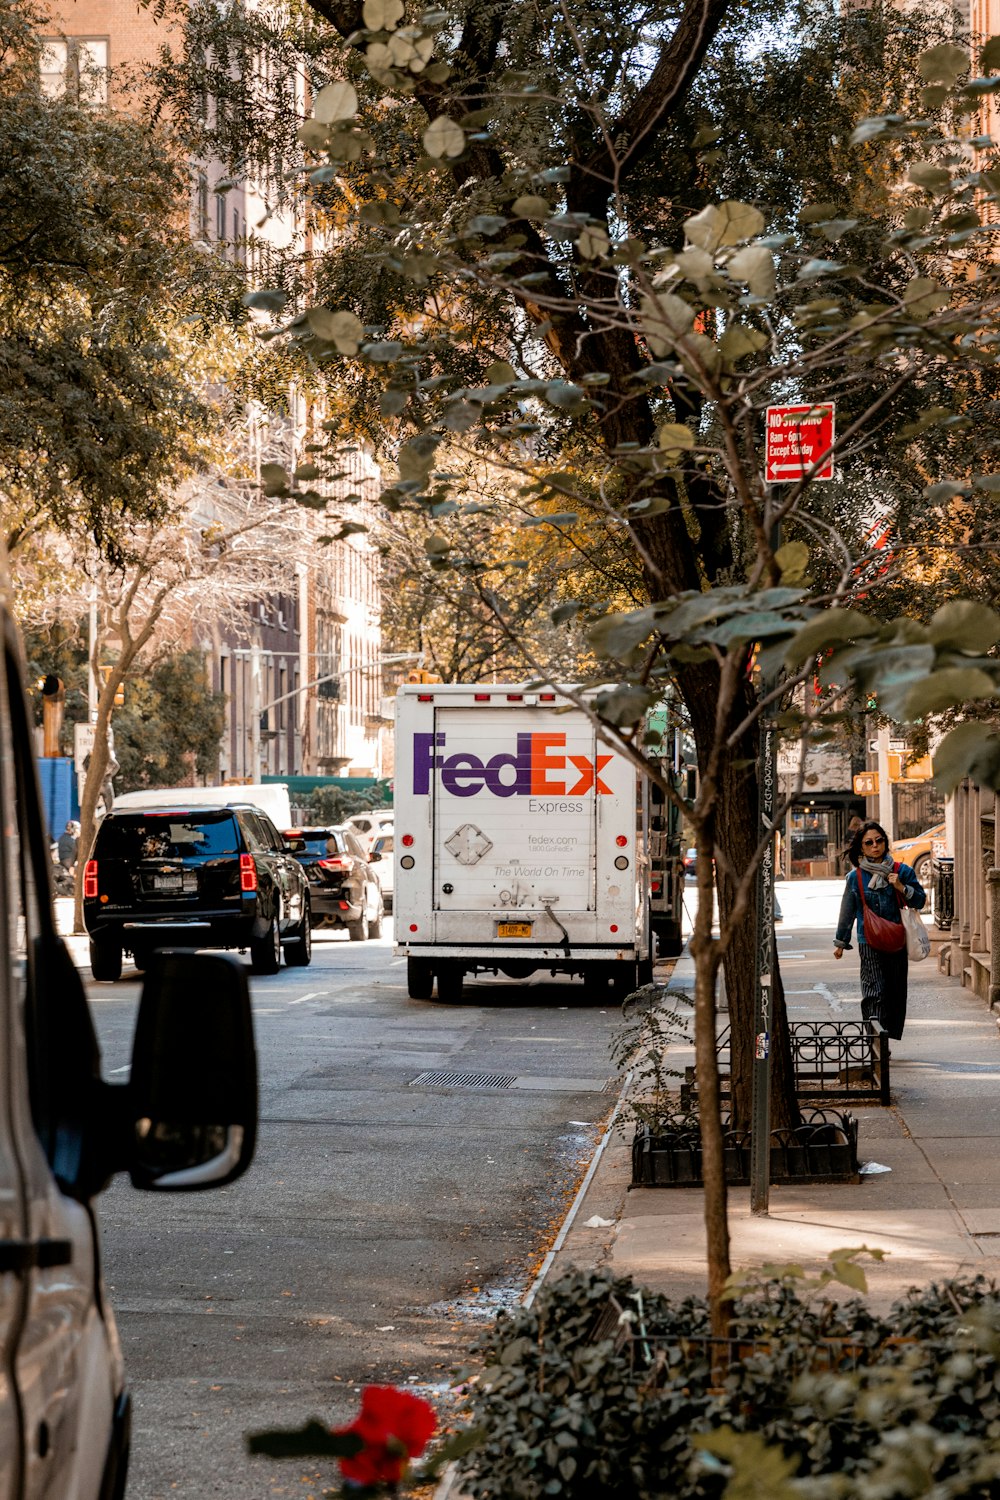 a fed ex truck parked on the side of a street